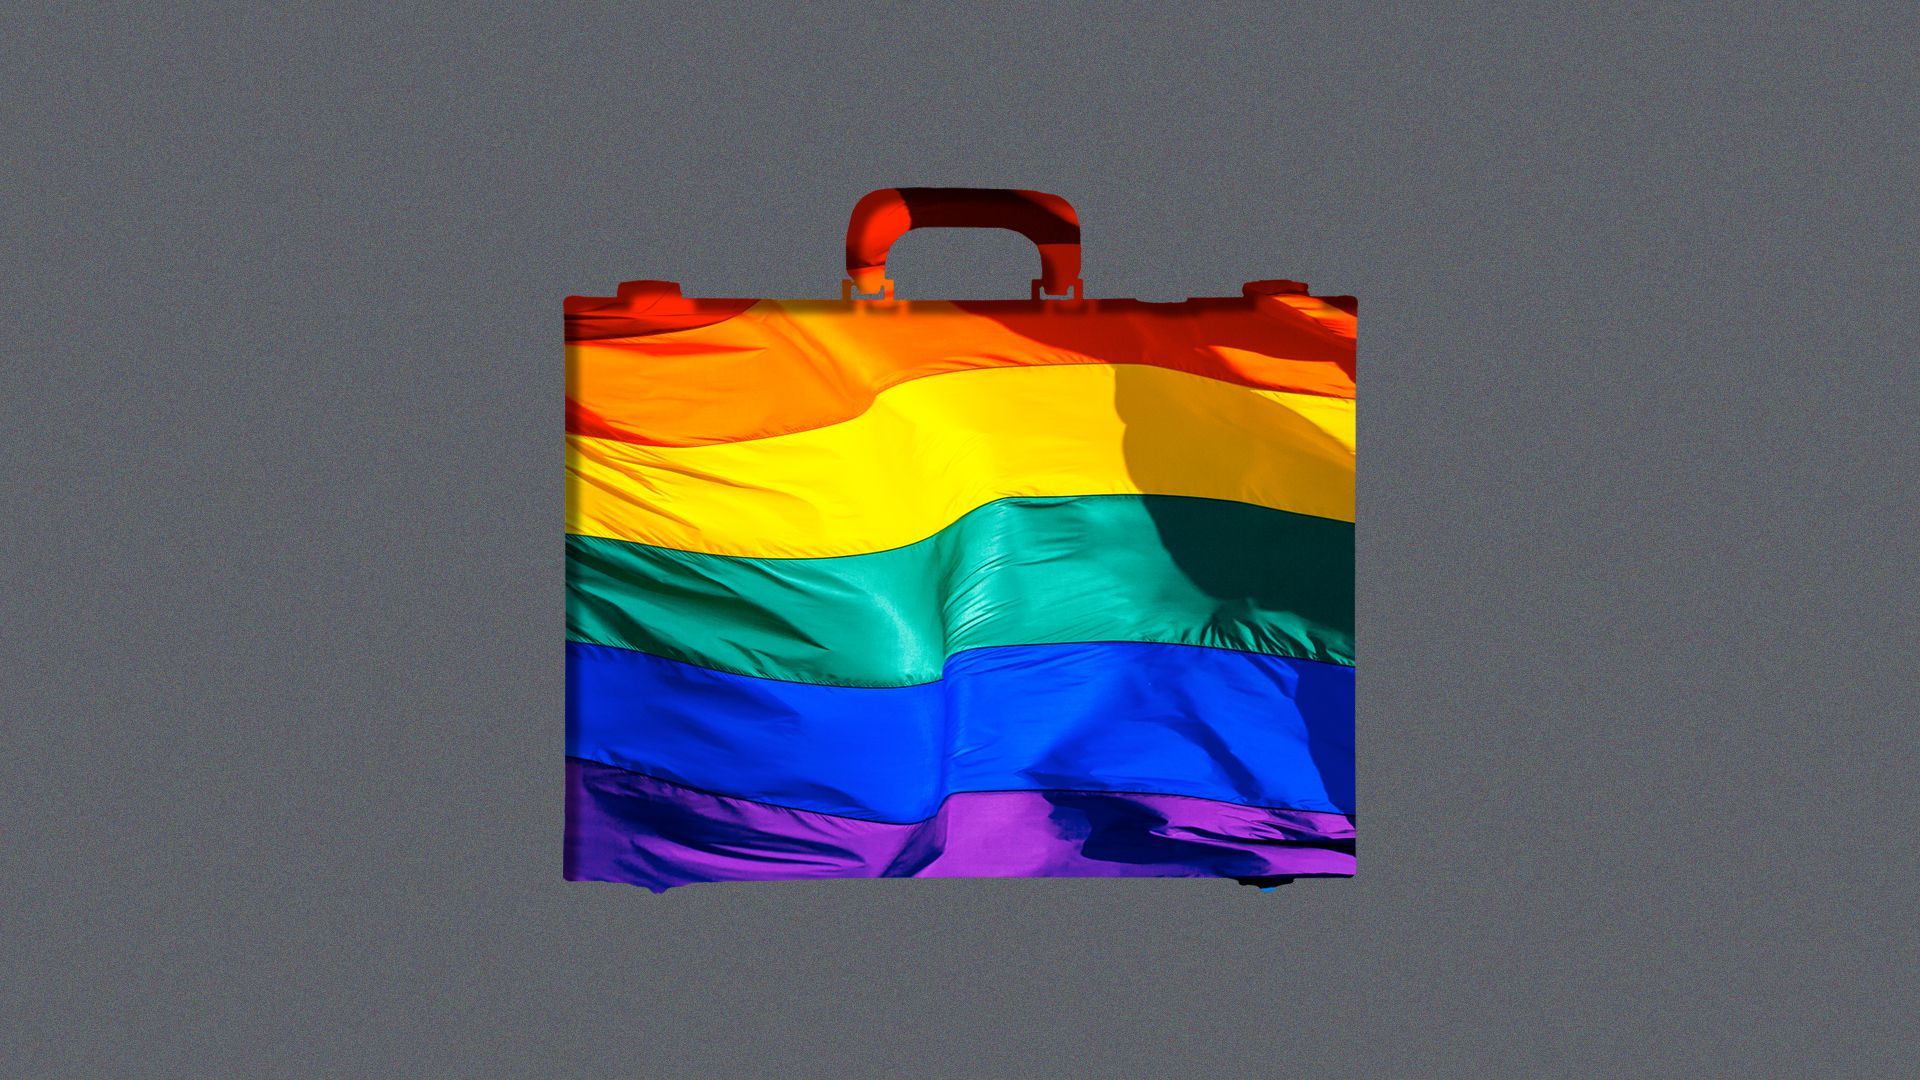 Illustration of the shape of a briefcase revealing a rainbow flag.